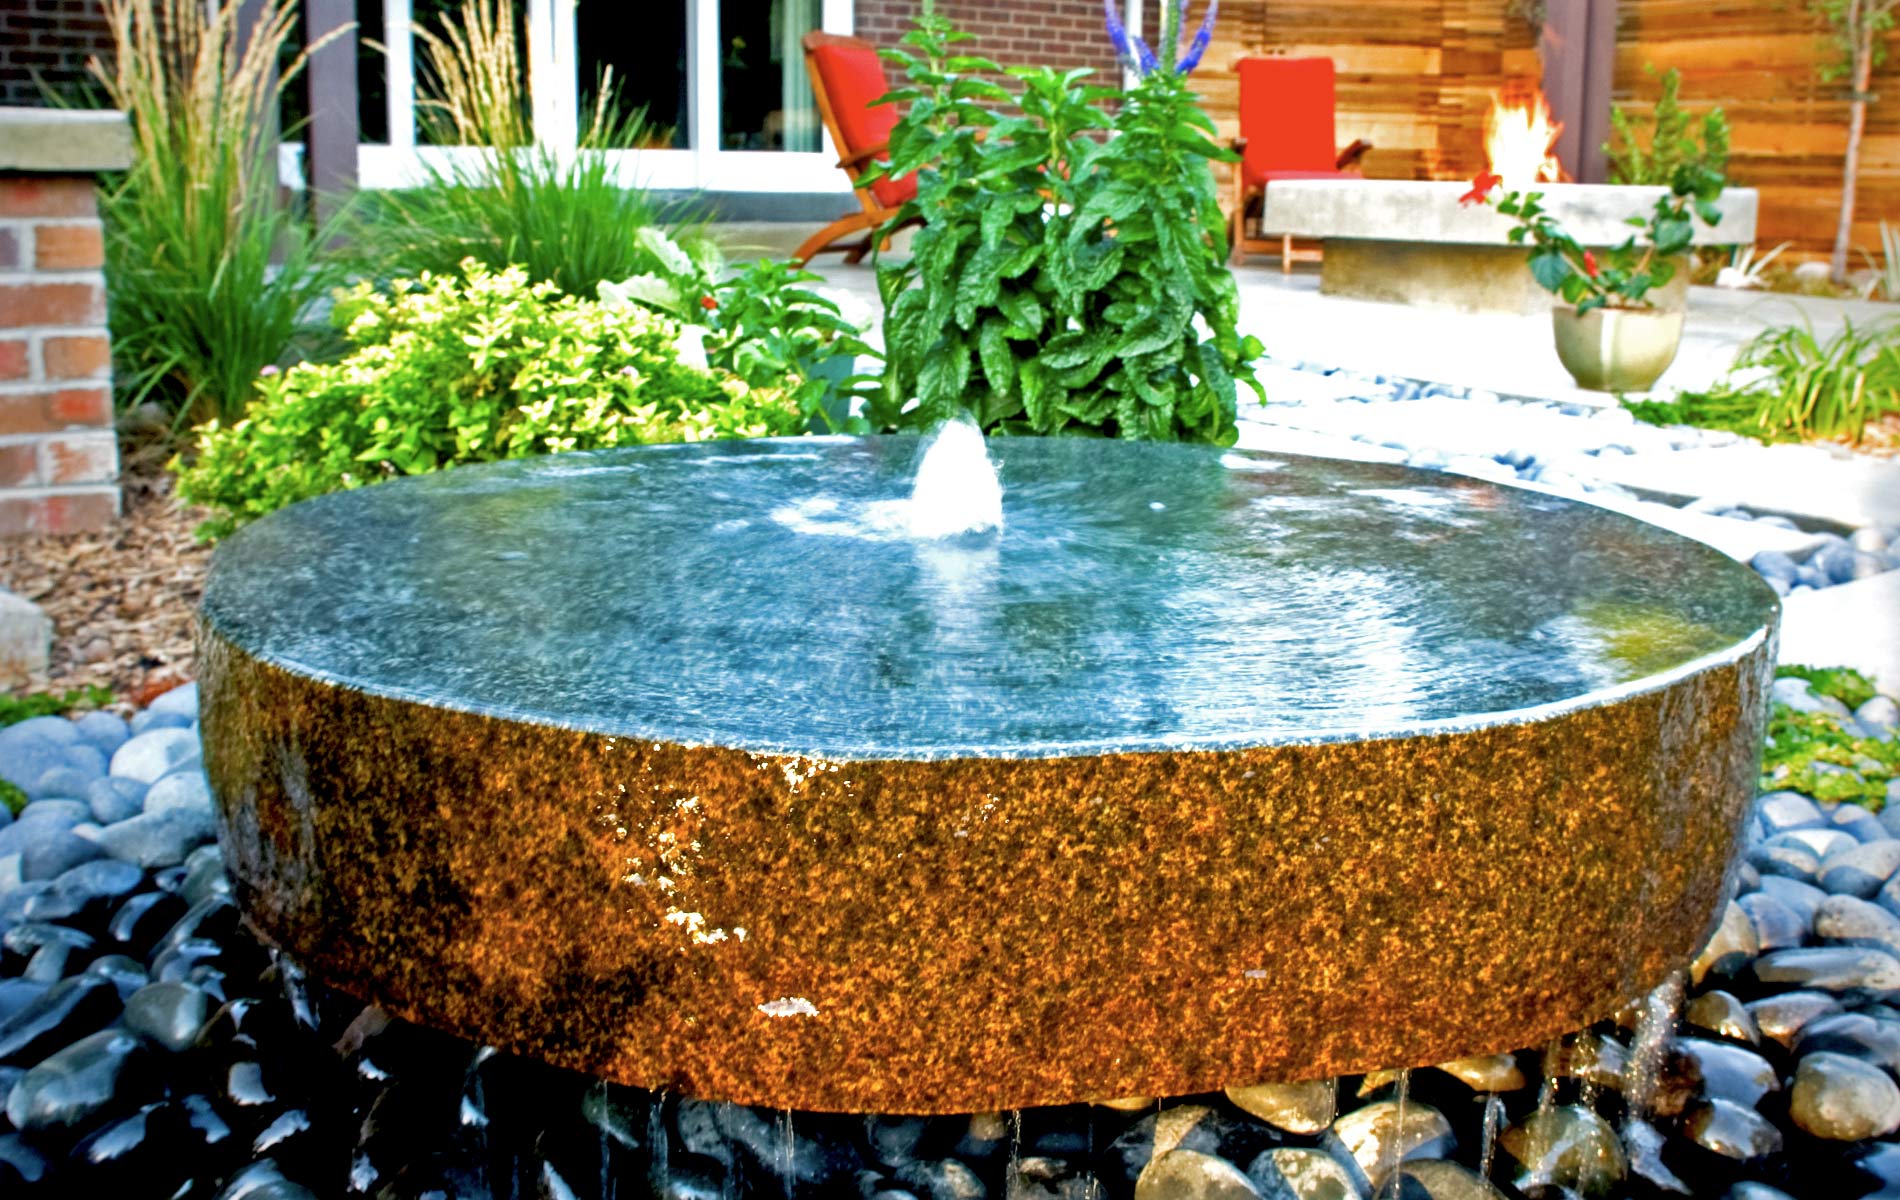 Milled basalt water fountain in Award Winning Outdoor Room Mile High Landscaping in Denver